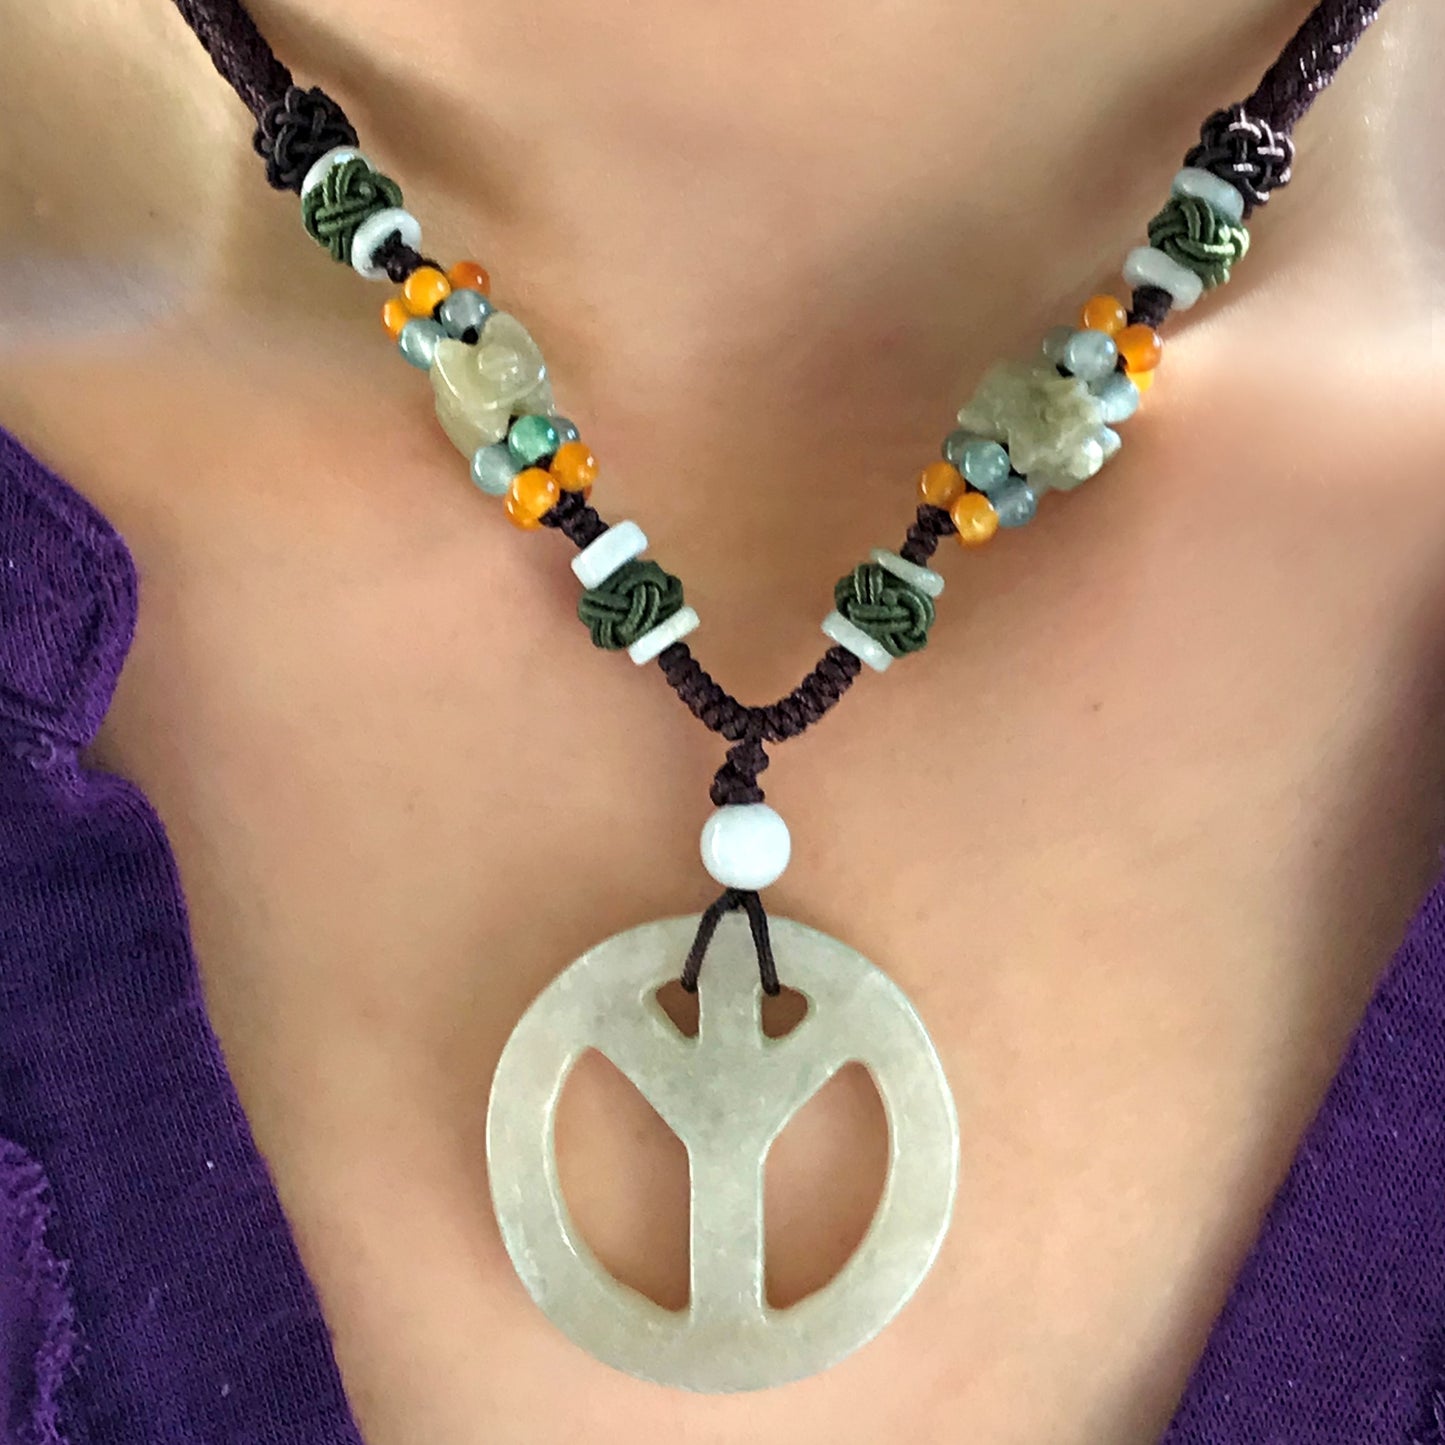 Calm and Zen with Peace Sign Handmade Jade Necklace Pendant